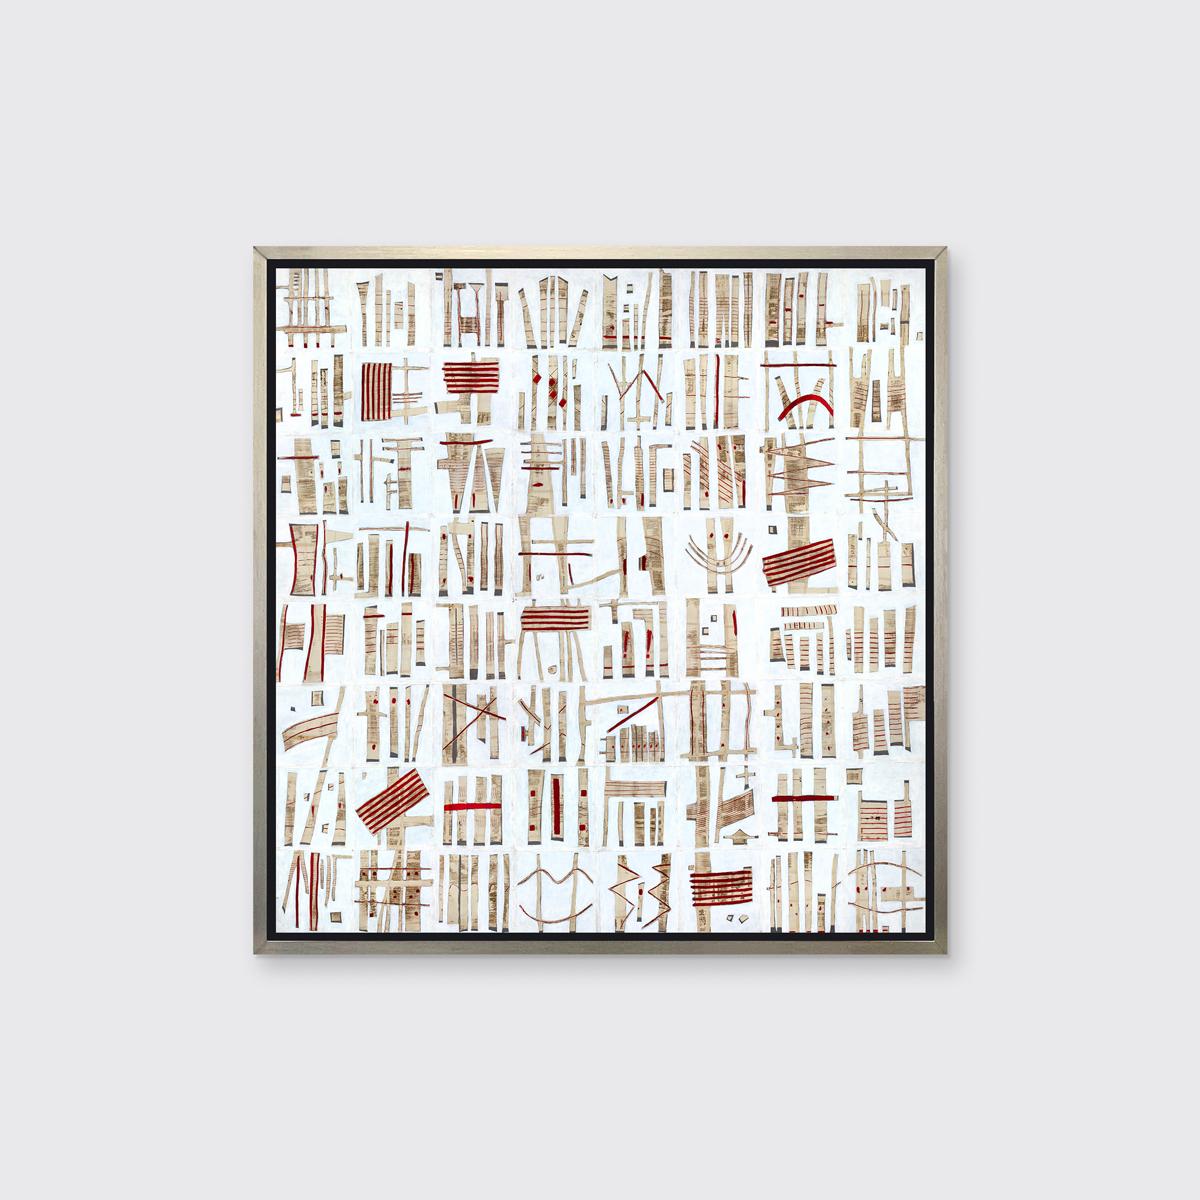 Sofie Swann Abstract Print - "Bedtime Story, " Framed Limited Edition Giclee Print, 36" x 36"